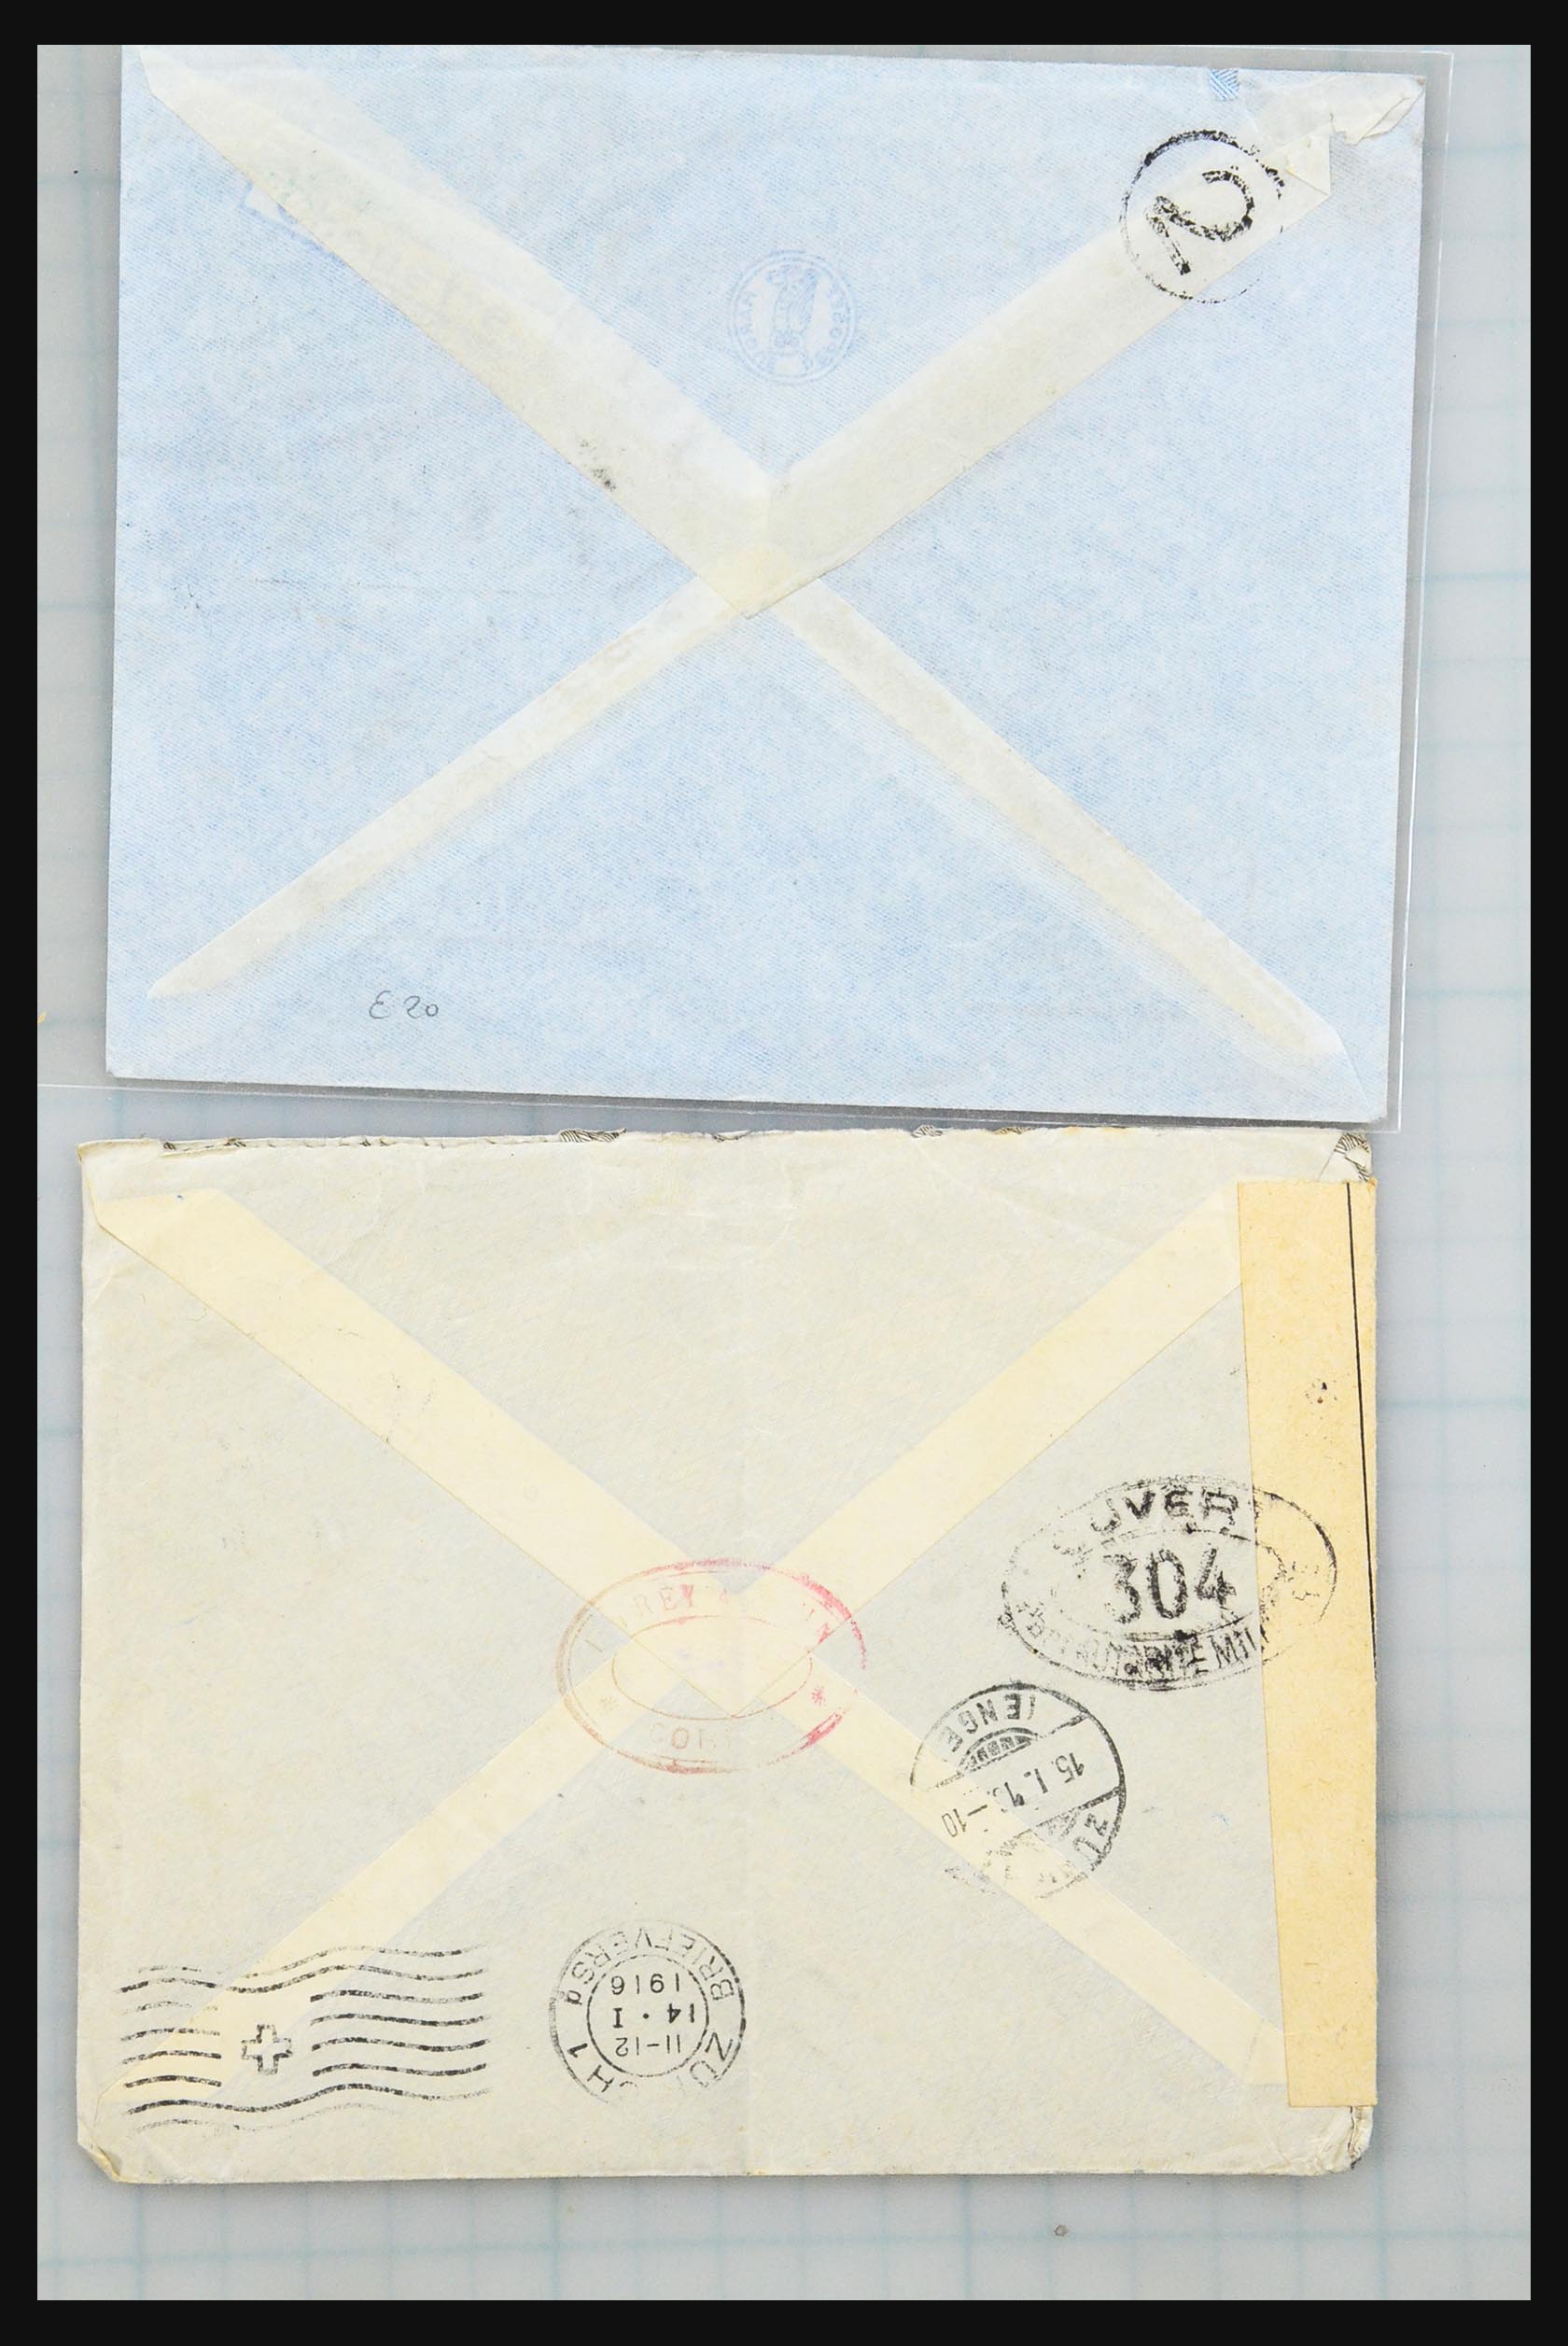 31358 037 - 31358 Portugal/Luxemburg/Greece covers 1880-1960.